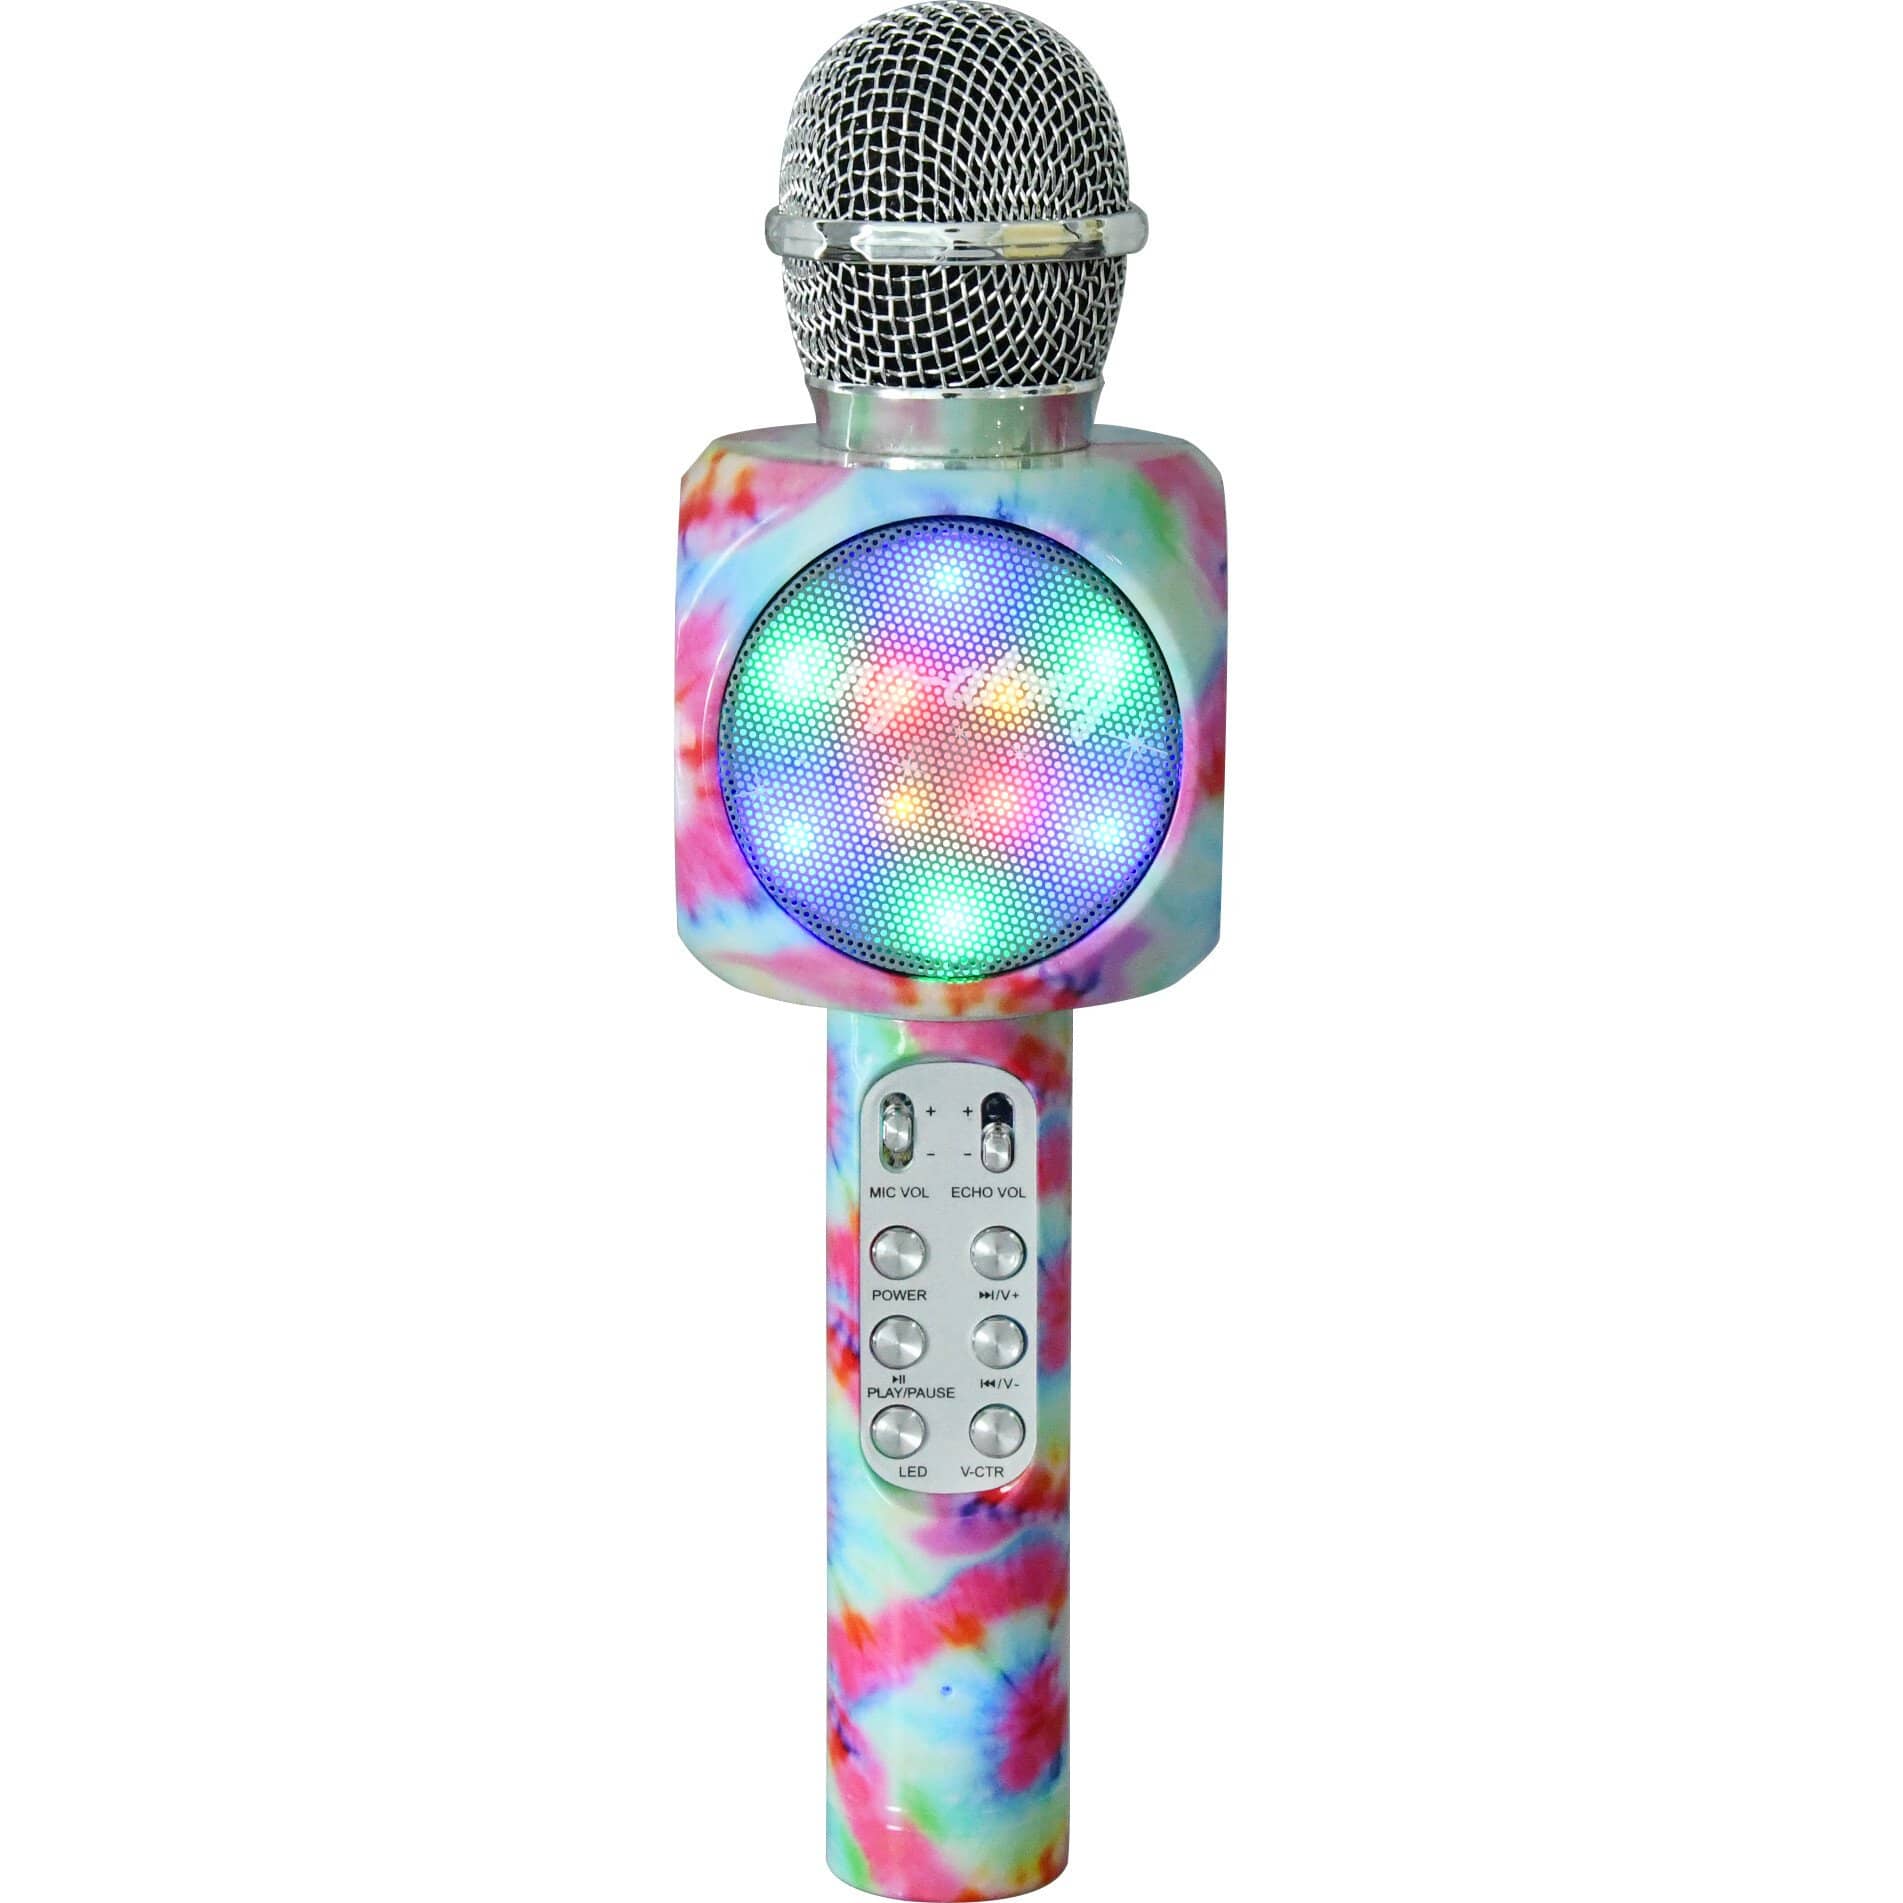 SING-ALONG BLING MICROPHONE TIE DYE EDITION